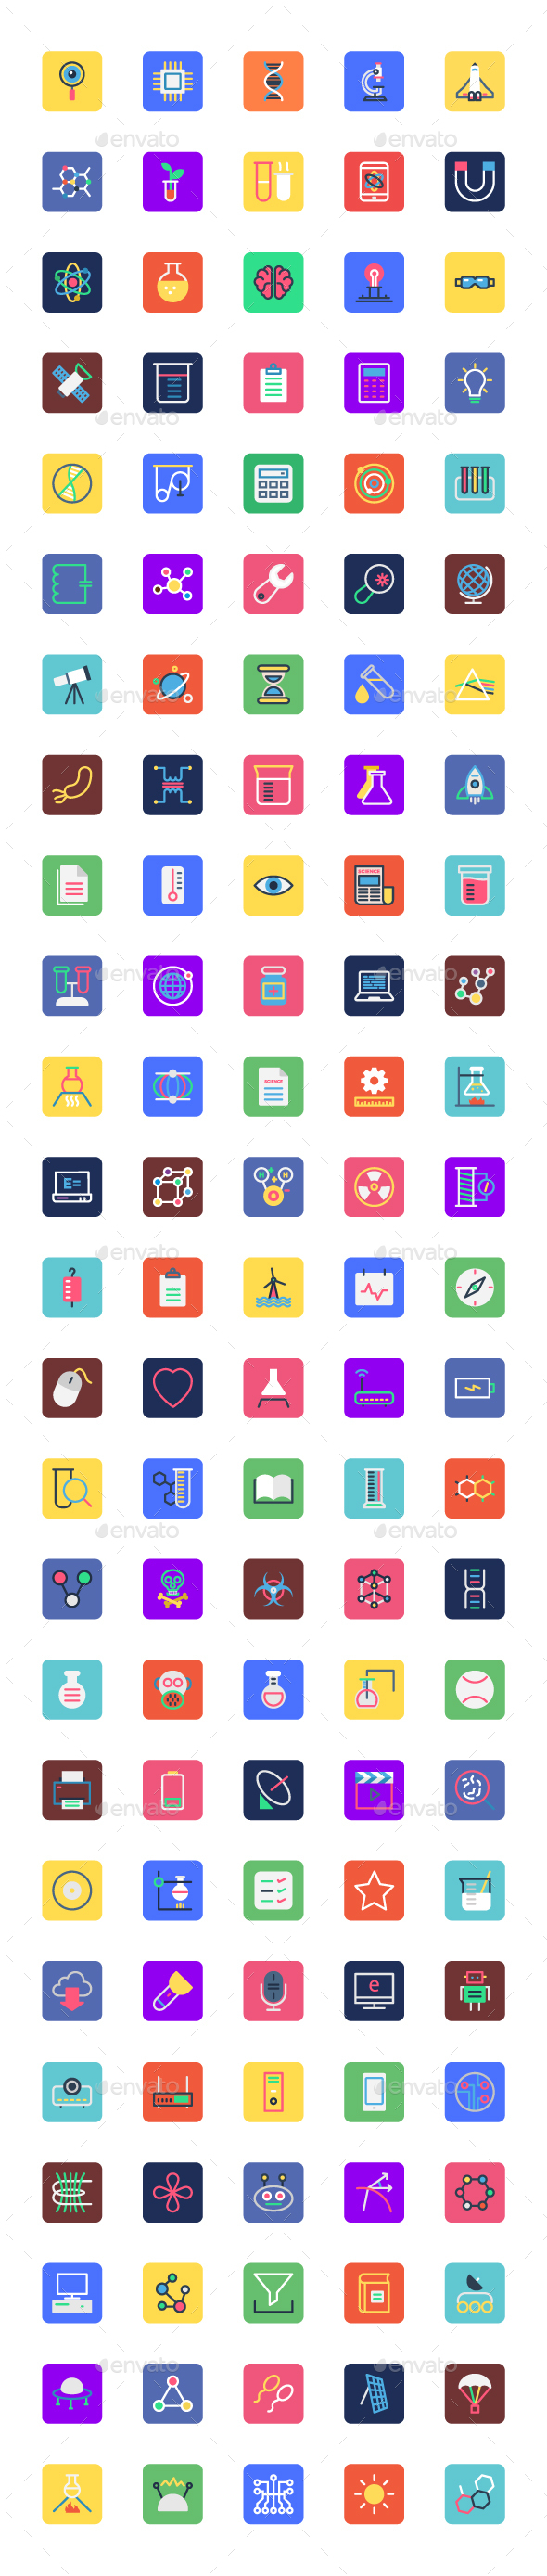 125 Science and Technology Icons Set